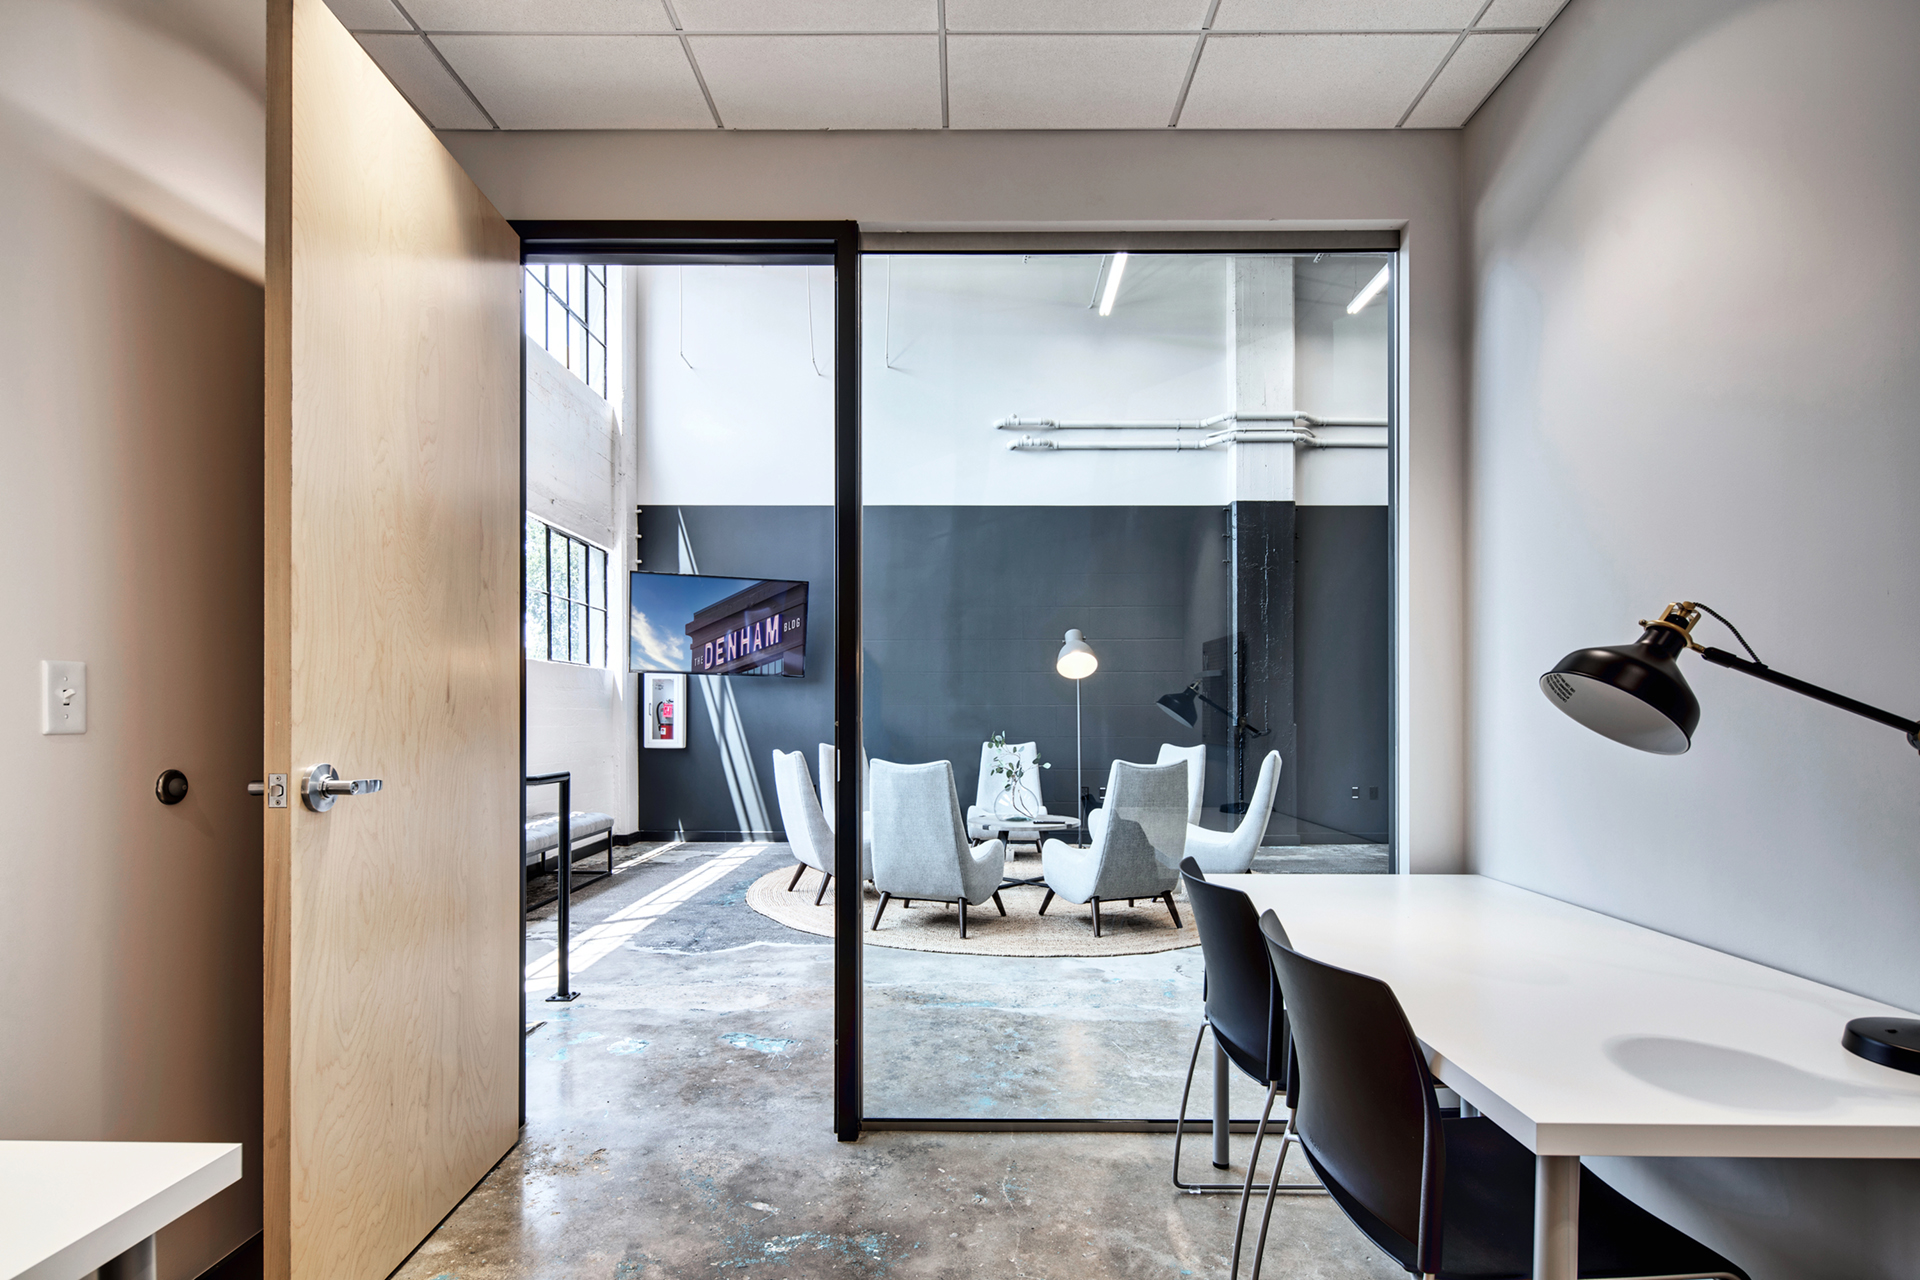 Office space with seating area for working professionals at The Denham Building in South Birmingham, AL